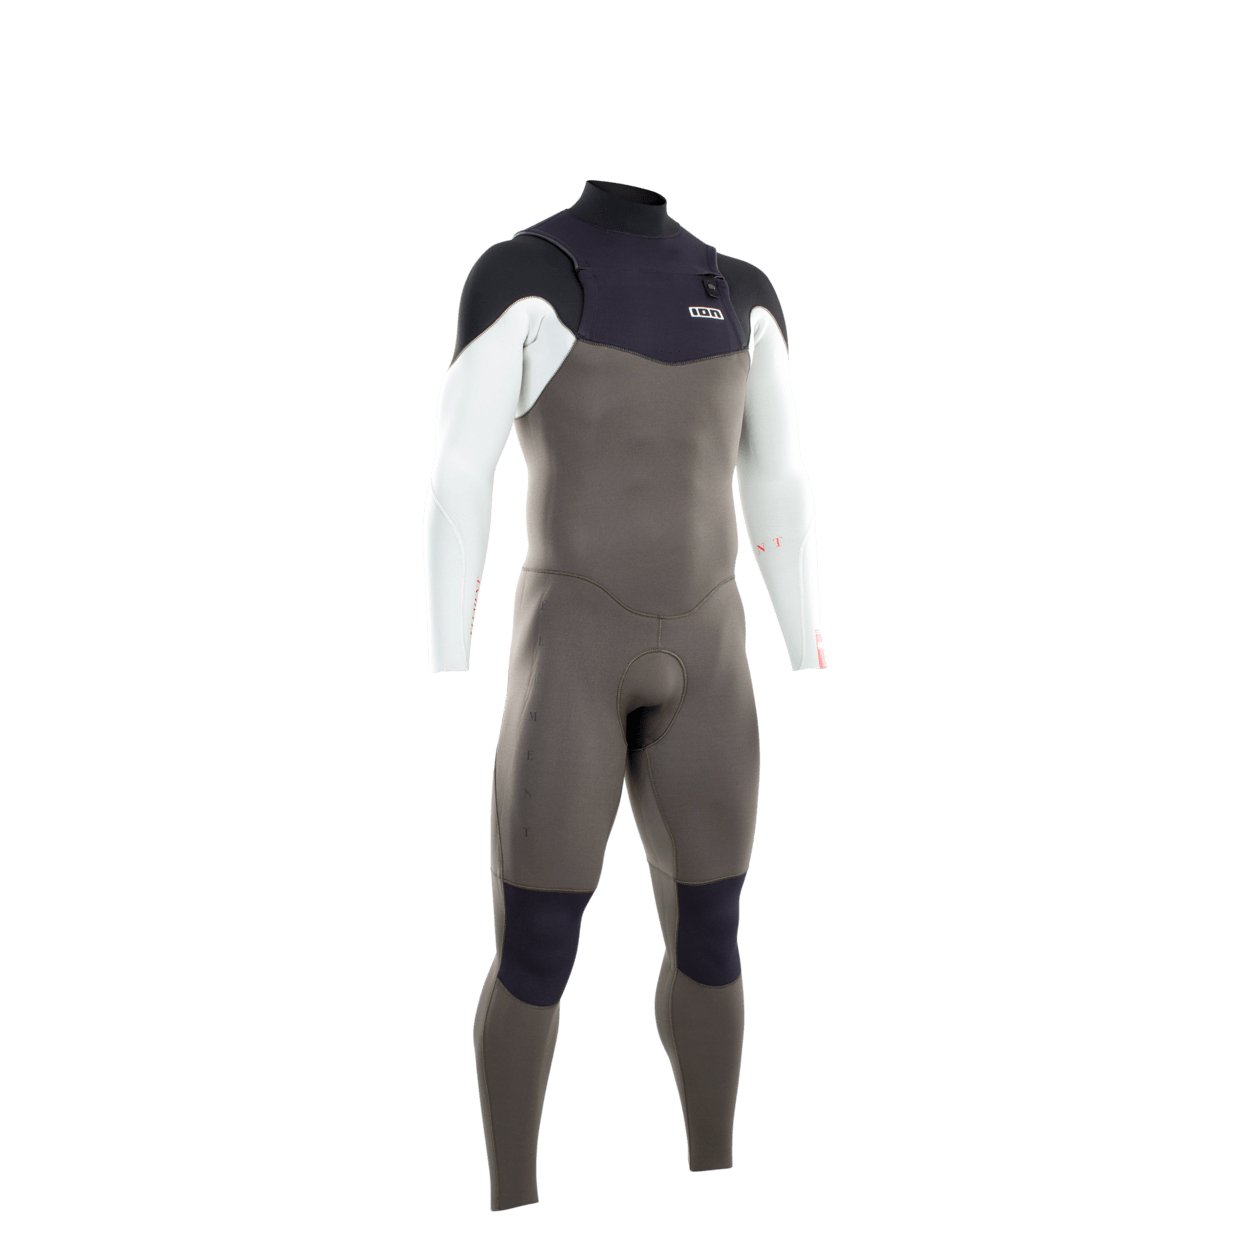 ION Men Wetsuit Element 3/2 Front Zip 2022 - Worthing Watersports - 9008415950553 - Wetsuits - ION Water